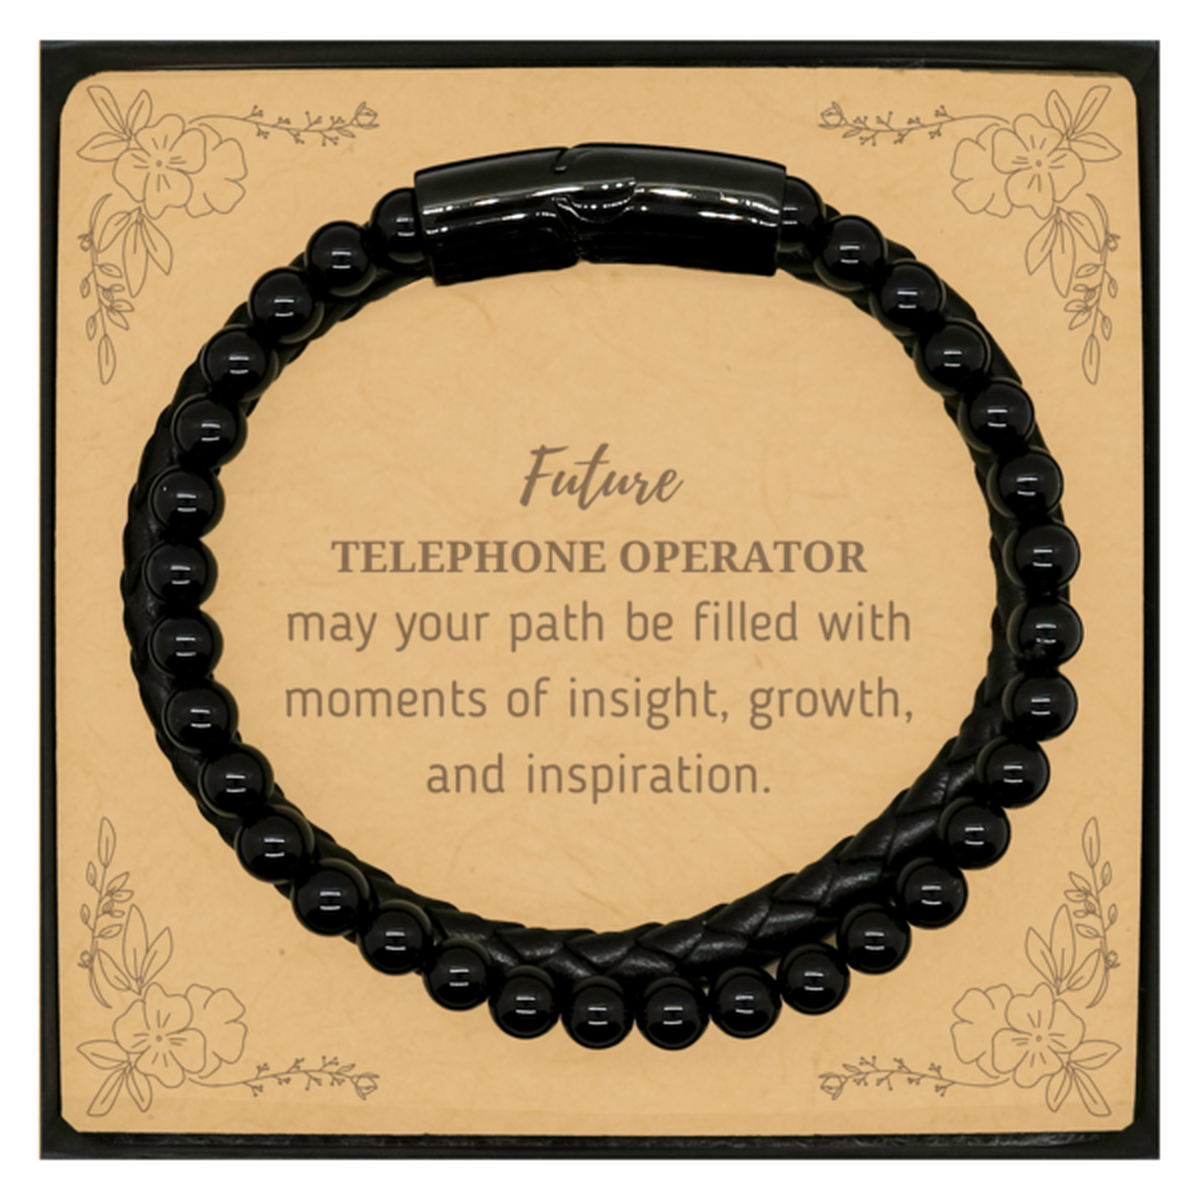 Future Telephone Operator Gifts, May your path be filled with moments of insight, Graduation Gifts for New Telephone Operator, Christmas Unique Stone Leather Bracelets For Men, Women, Friends